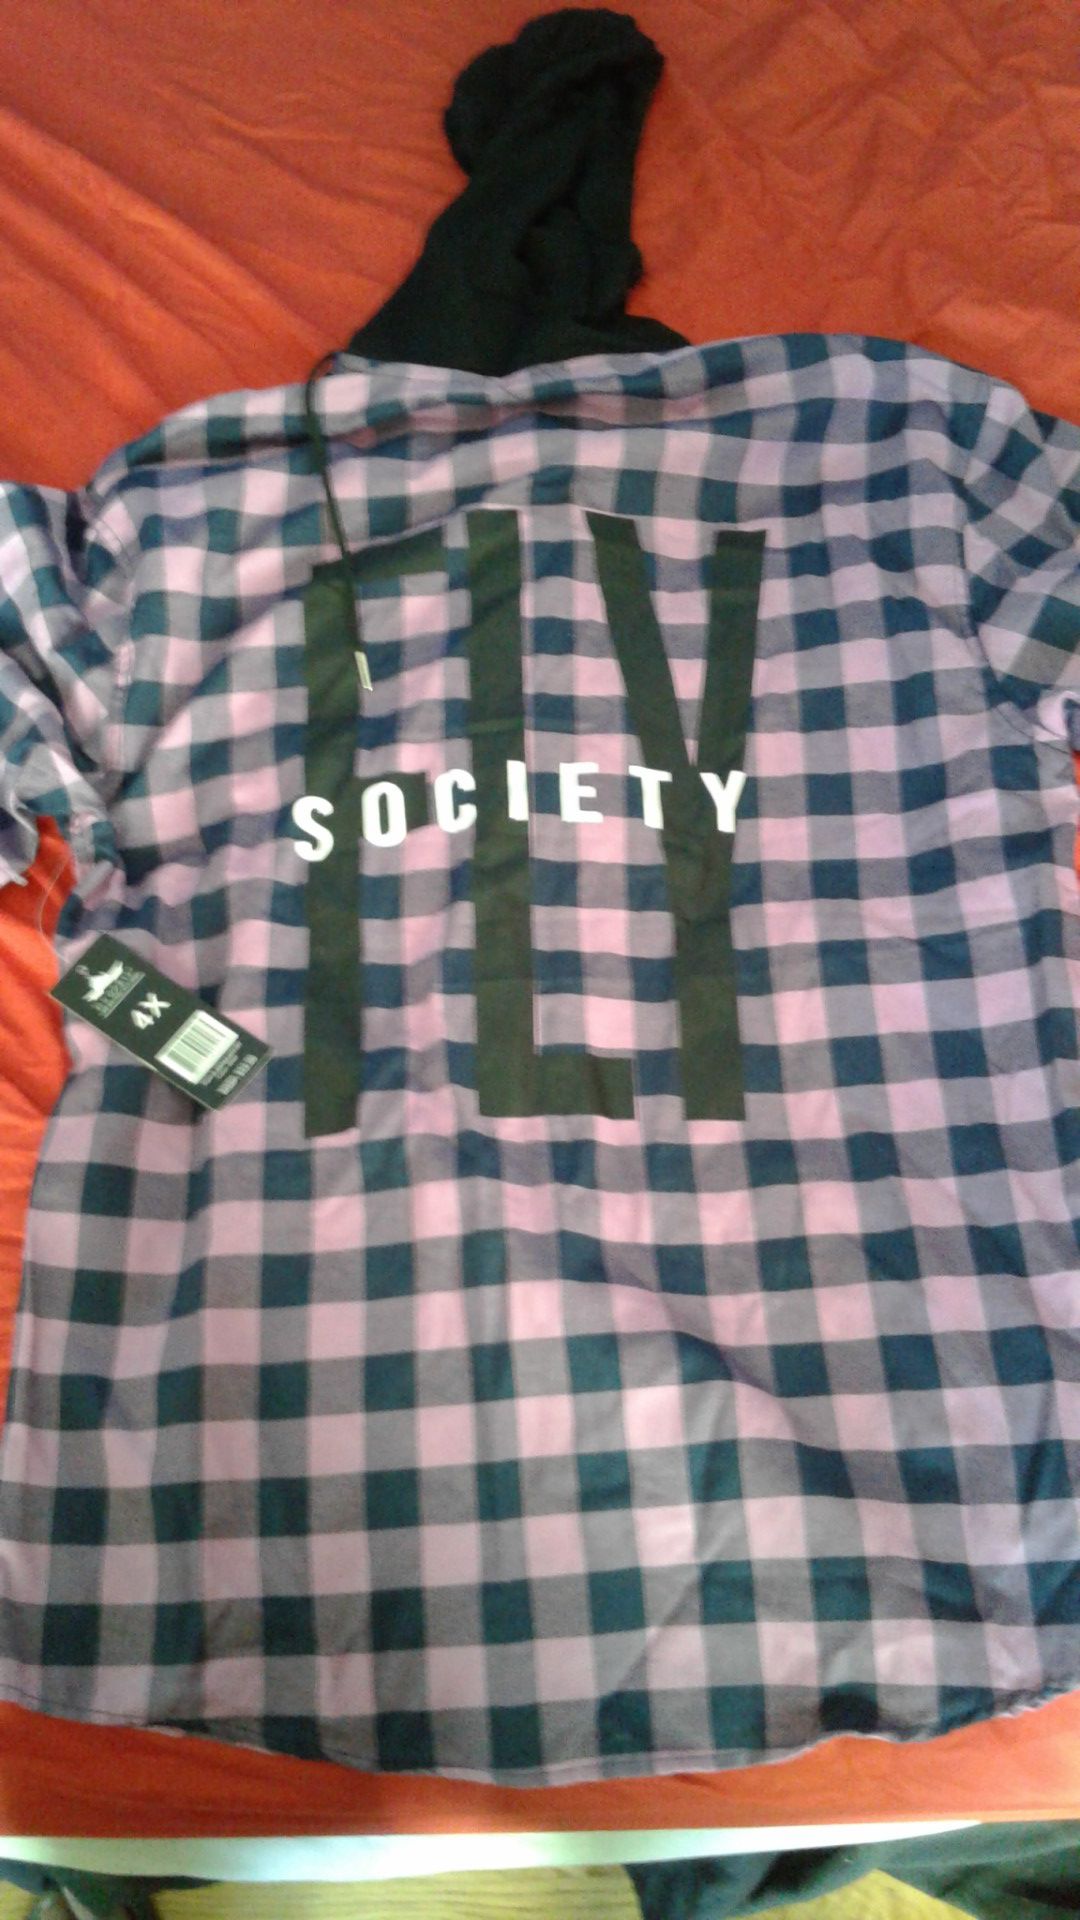 Fly Society Shirt sleeve hoodie size 4X but fits like 2X